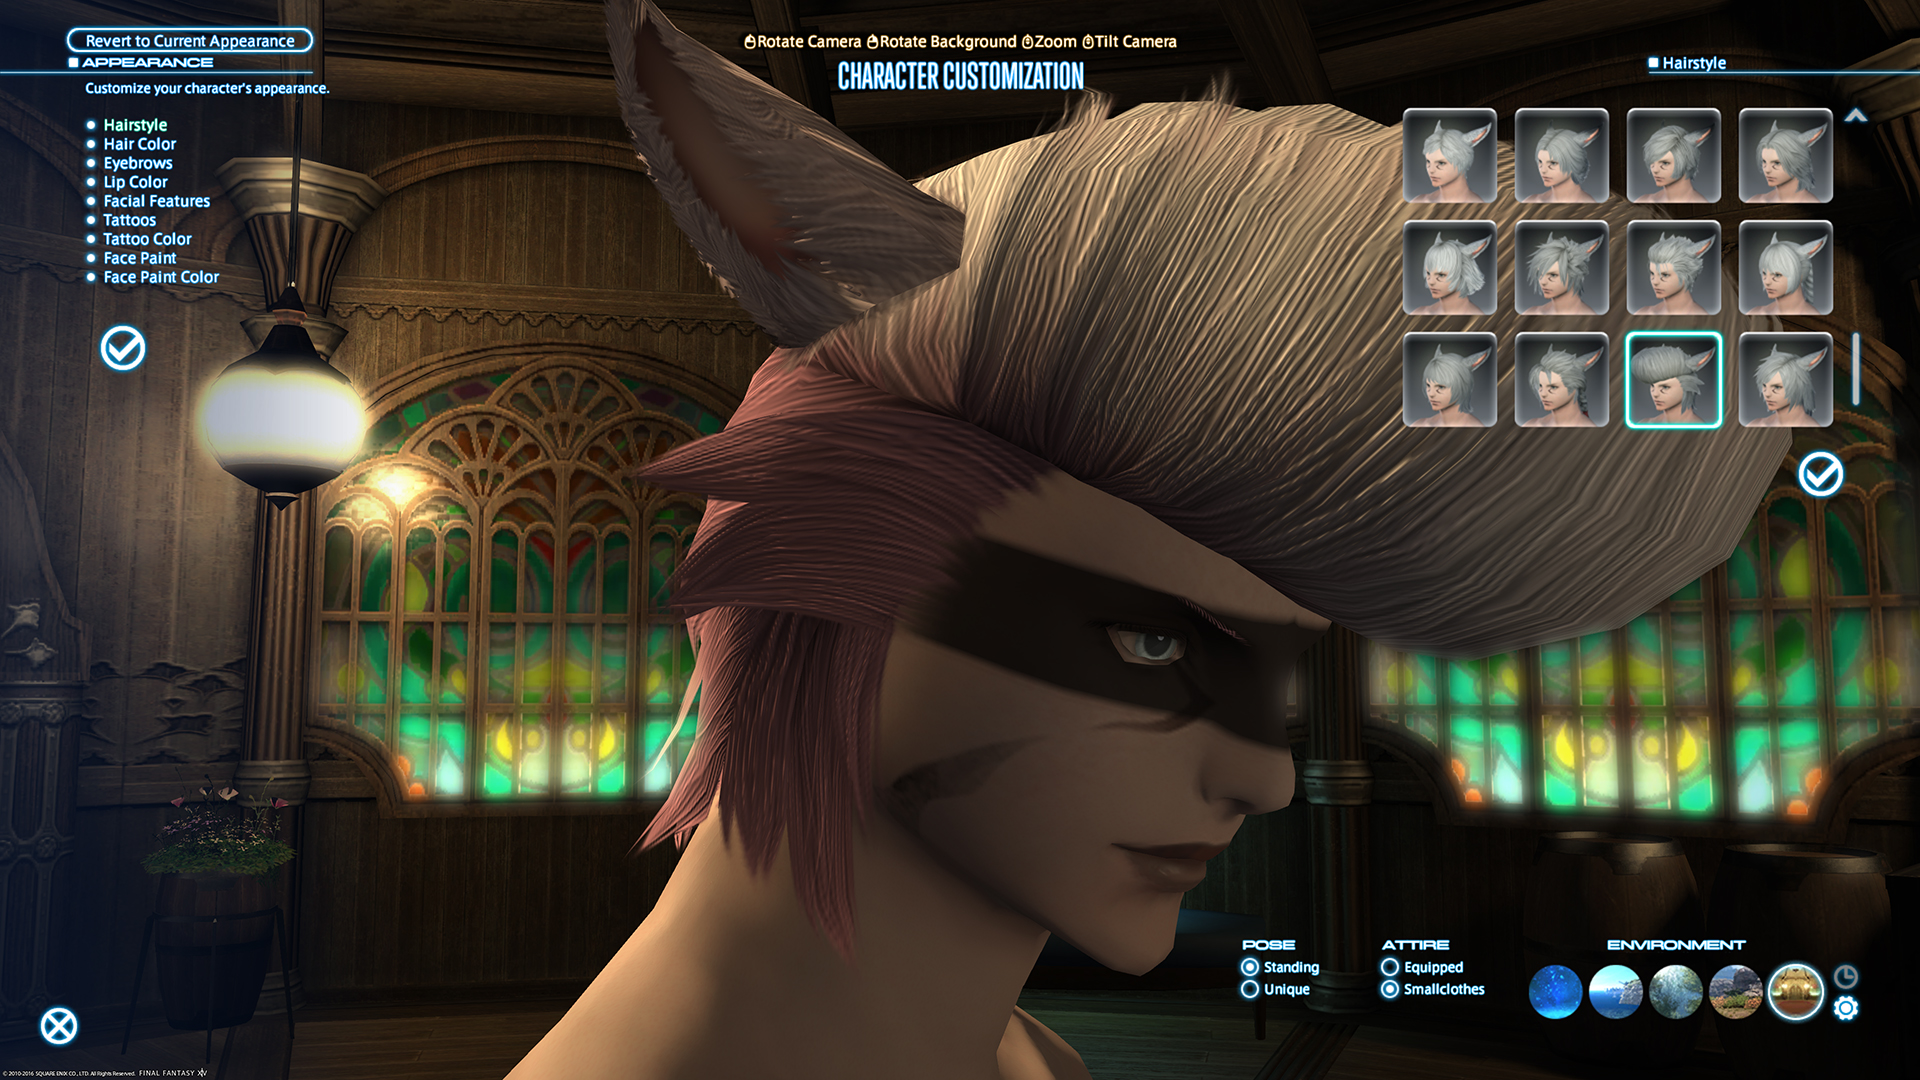 Final Fantasy XIV Finally Gets An Optimise Equipment Button, And It’s Great